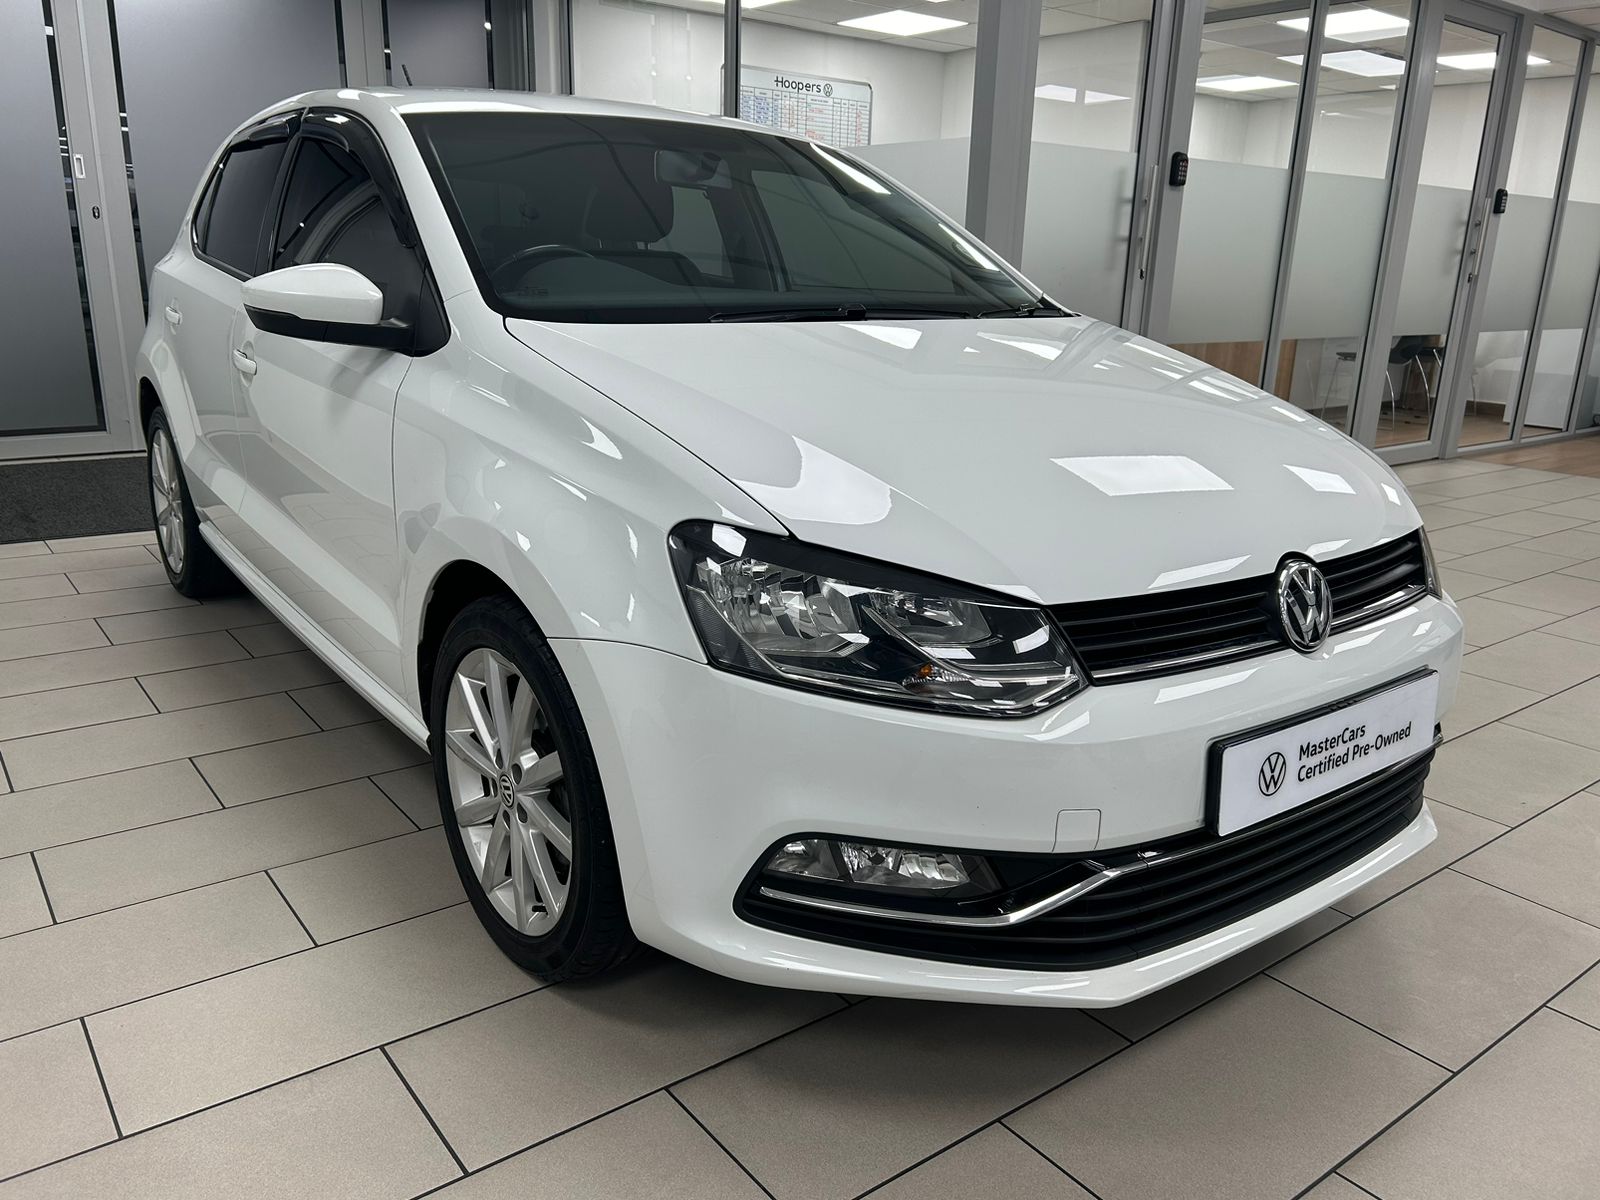 2015 Volkswagen Polo Hatch  for sale - 78277